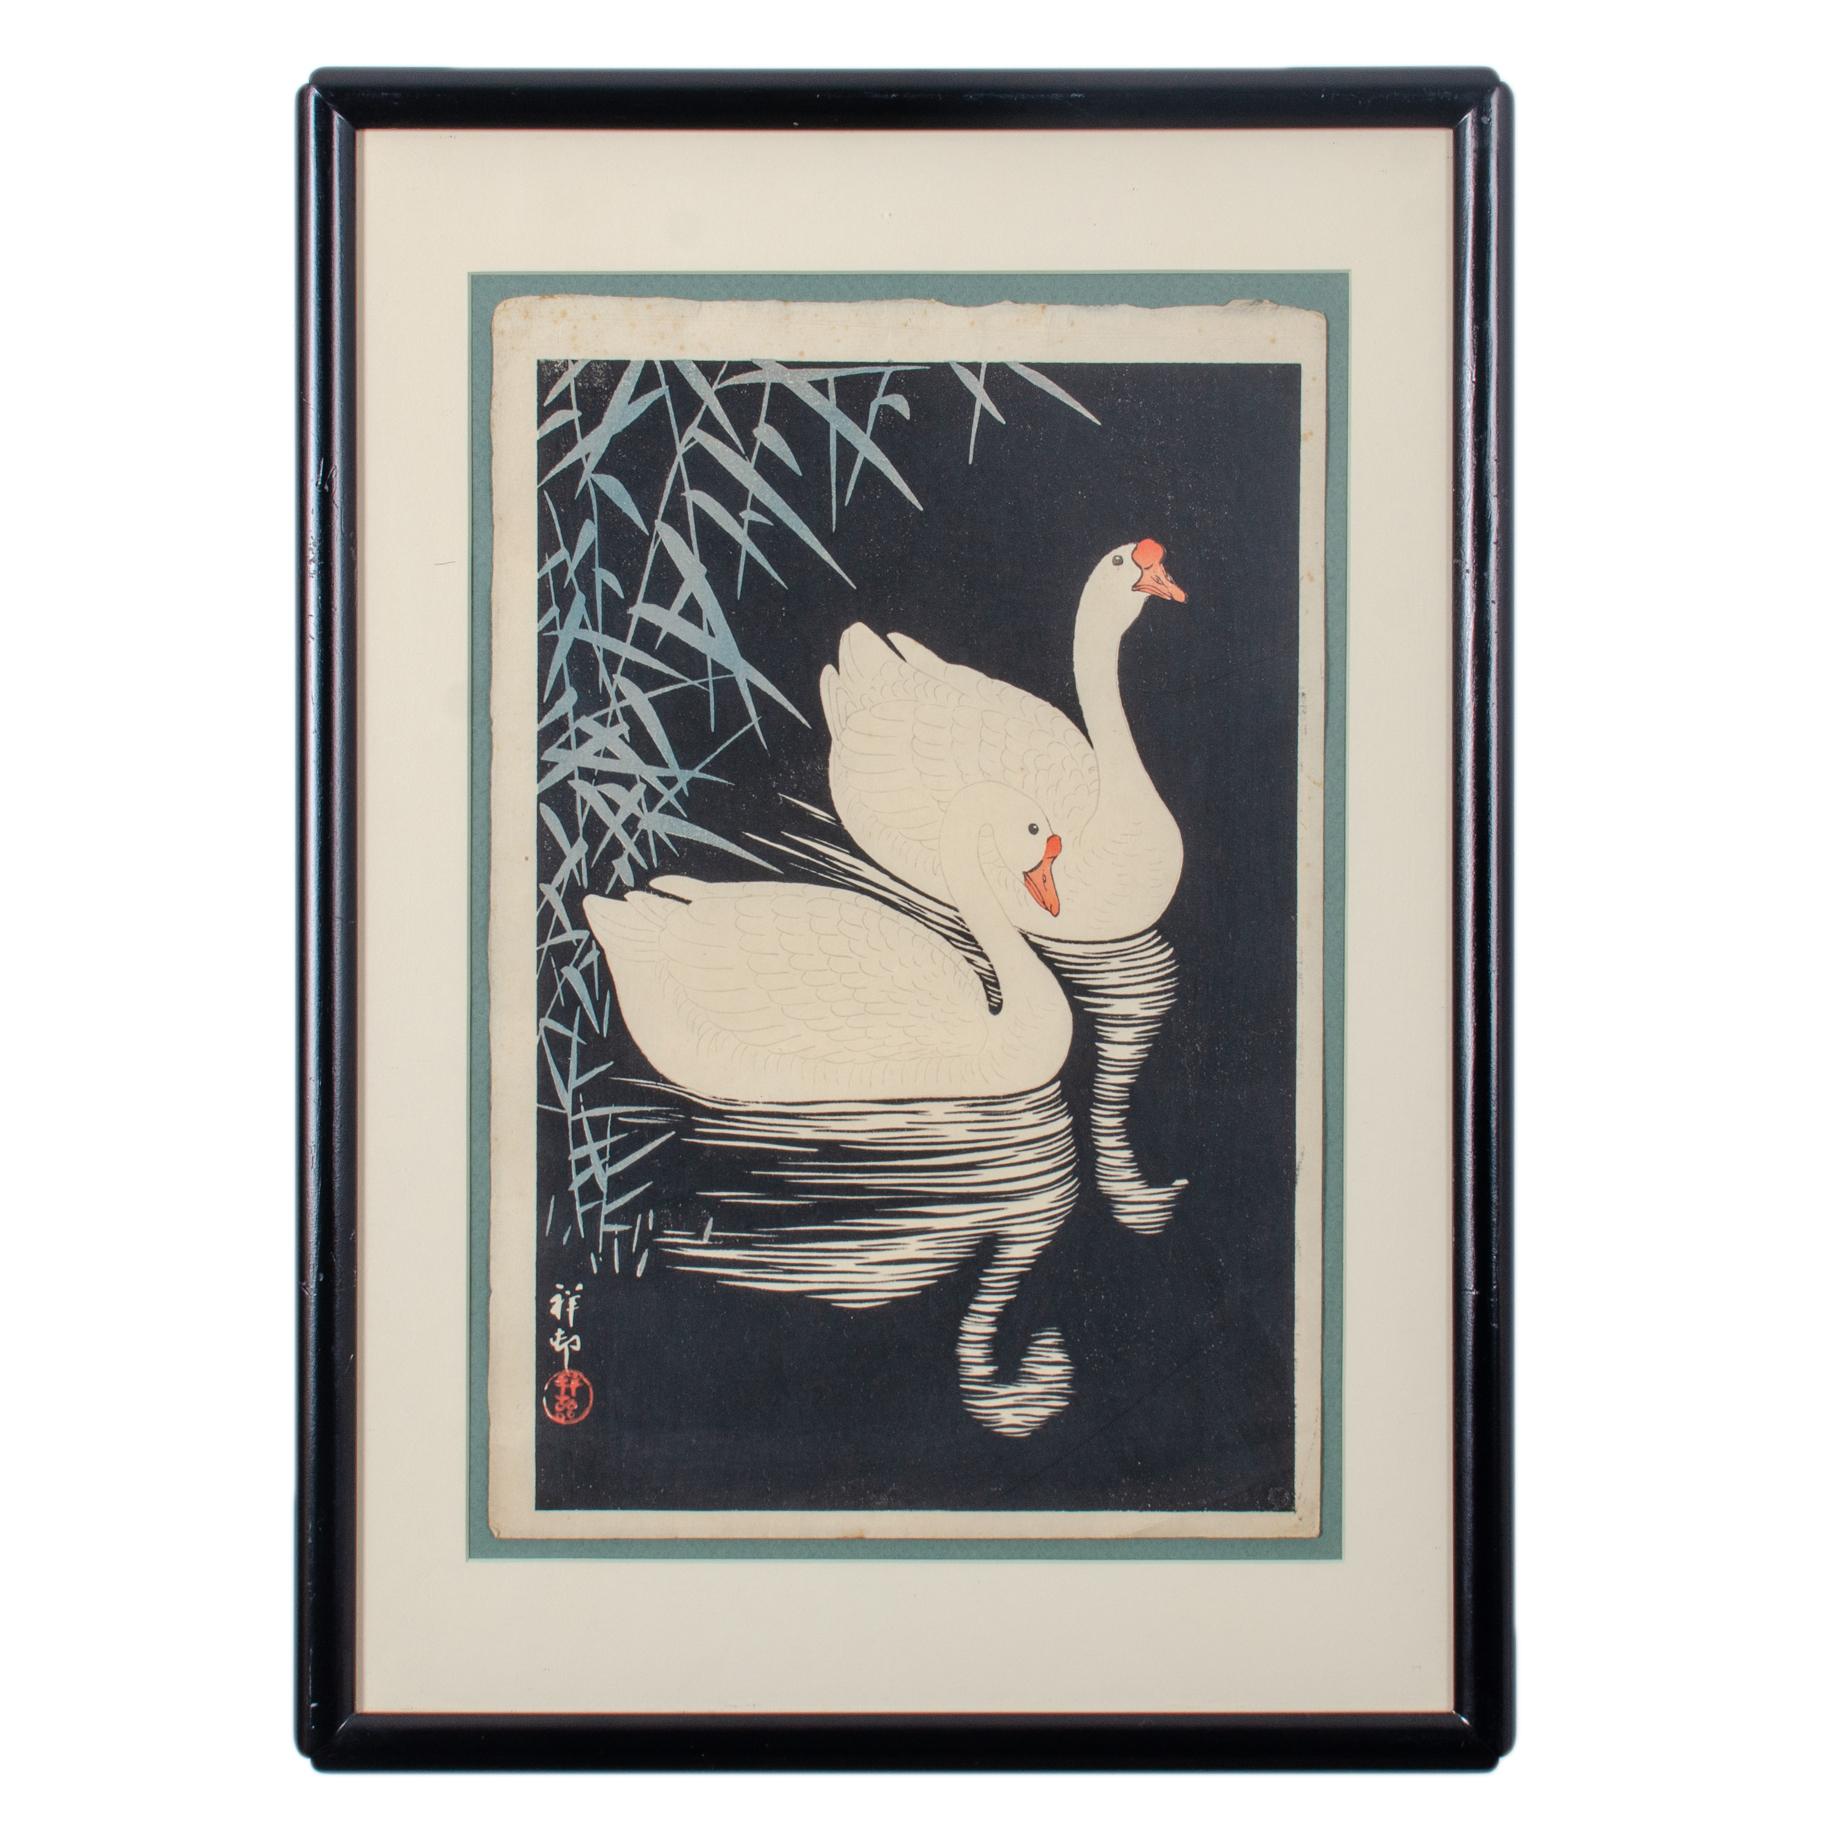 Ohara Koson (Shoson)

(Japanese, 1877-1945)

 

Pair of woodblock prints

Two white geese and reeds, c.1928

Chrysanthemum and Stream, c. 1931

 

Paper size: 10 ¼ by 15 ¼ inches

Frame: 15 by 21 inches

 

The woodblock prints are floated in simple